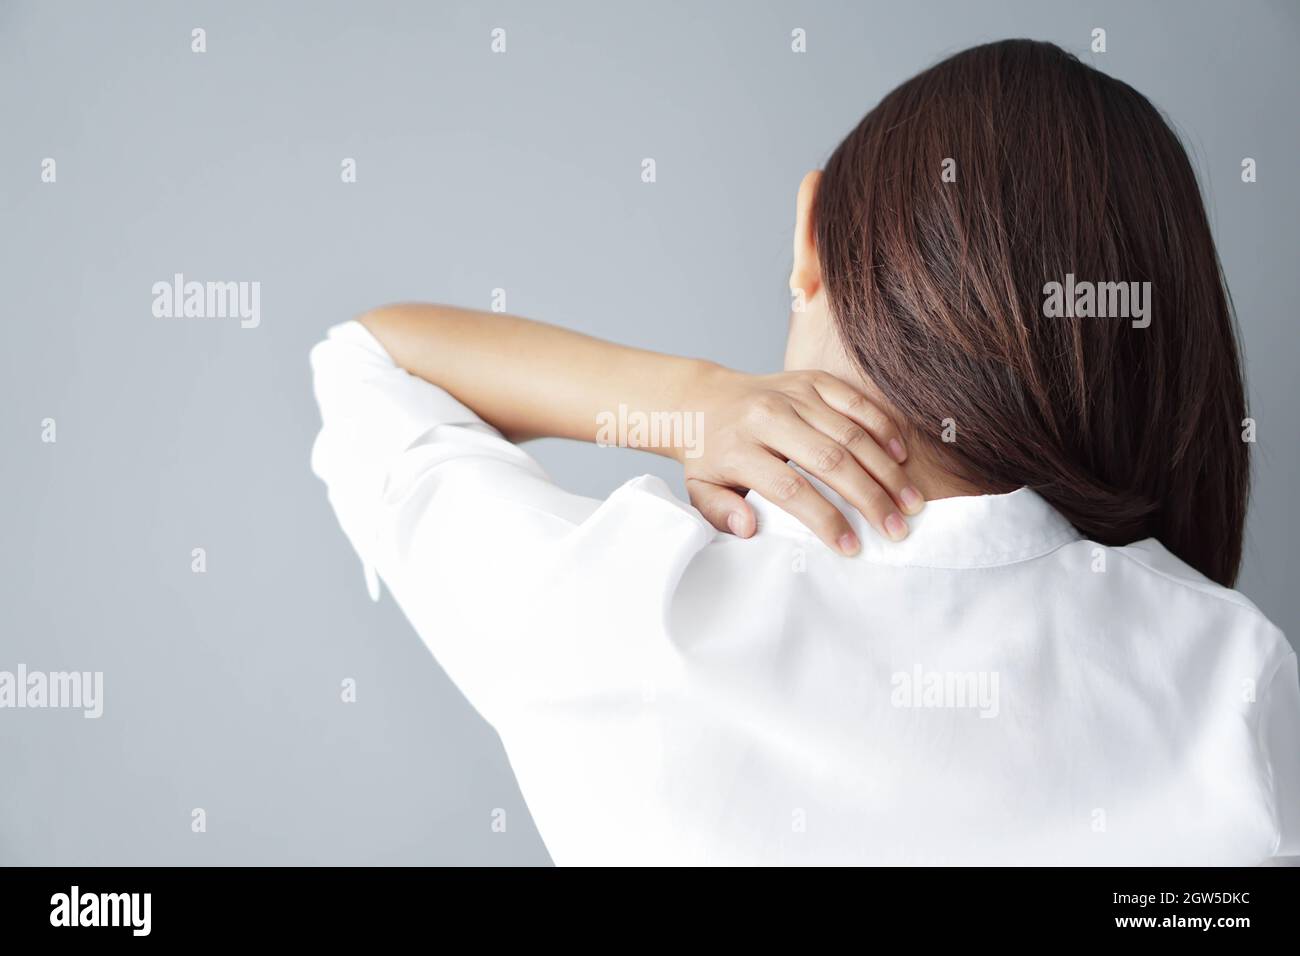 Rear View Of Woman Having Neckache Against Gray Background Stock Photo